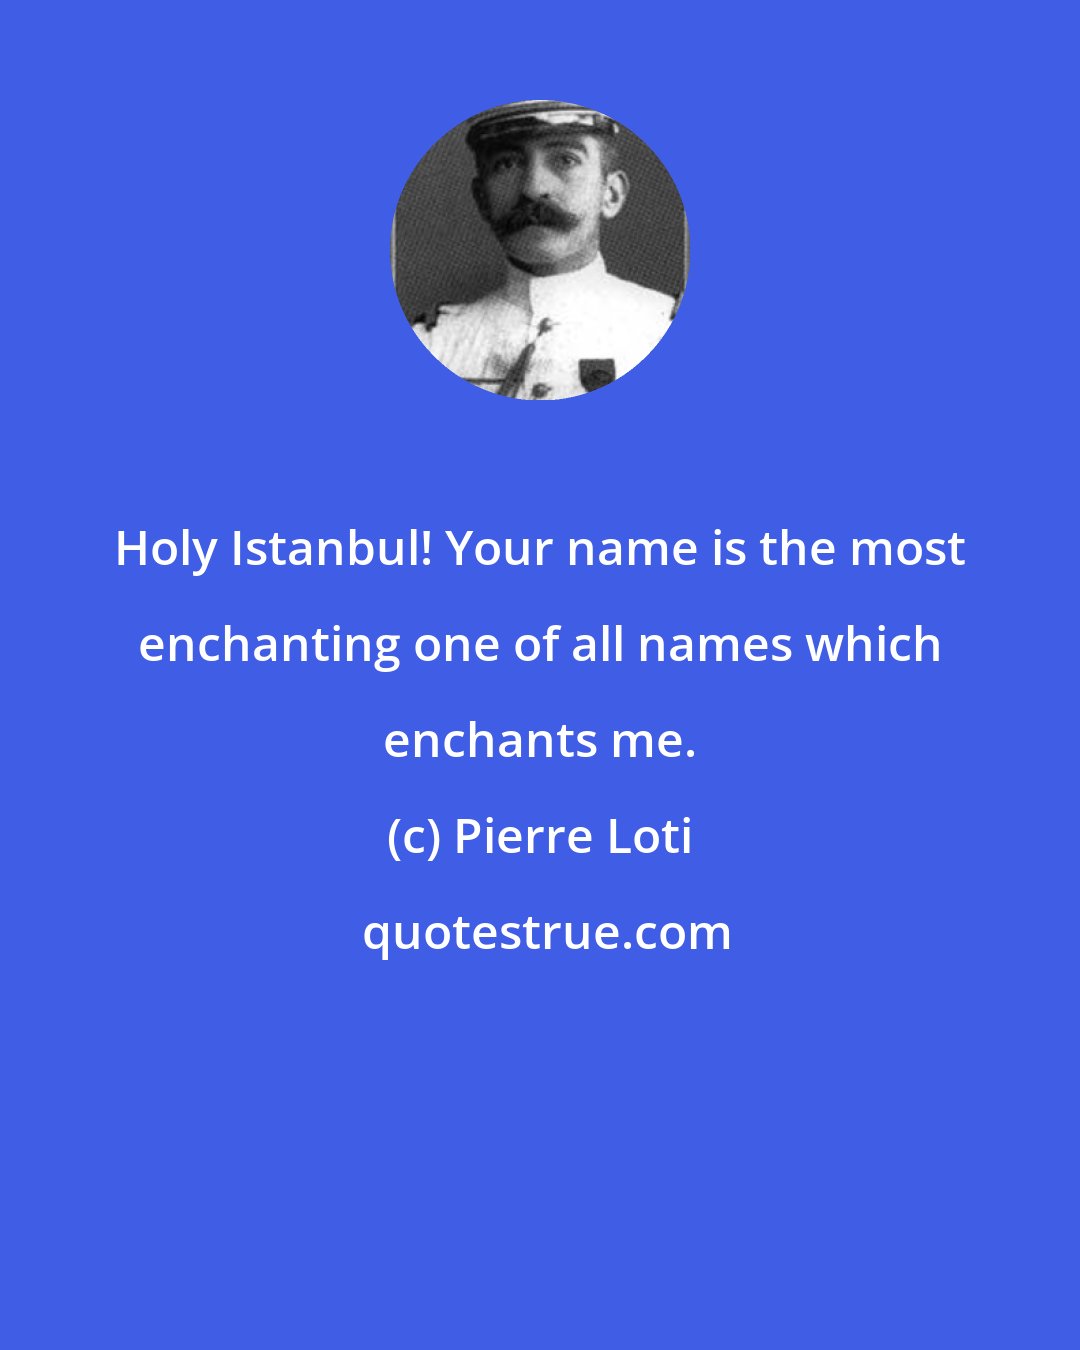 Pierre Loti: Holy Istanbul! Your name is the most enchanting one of all names which enchants me.